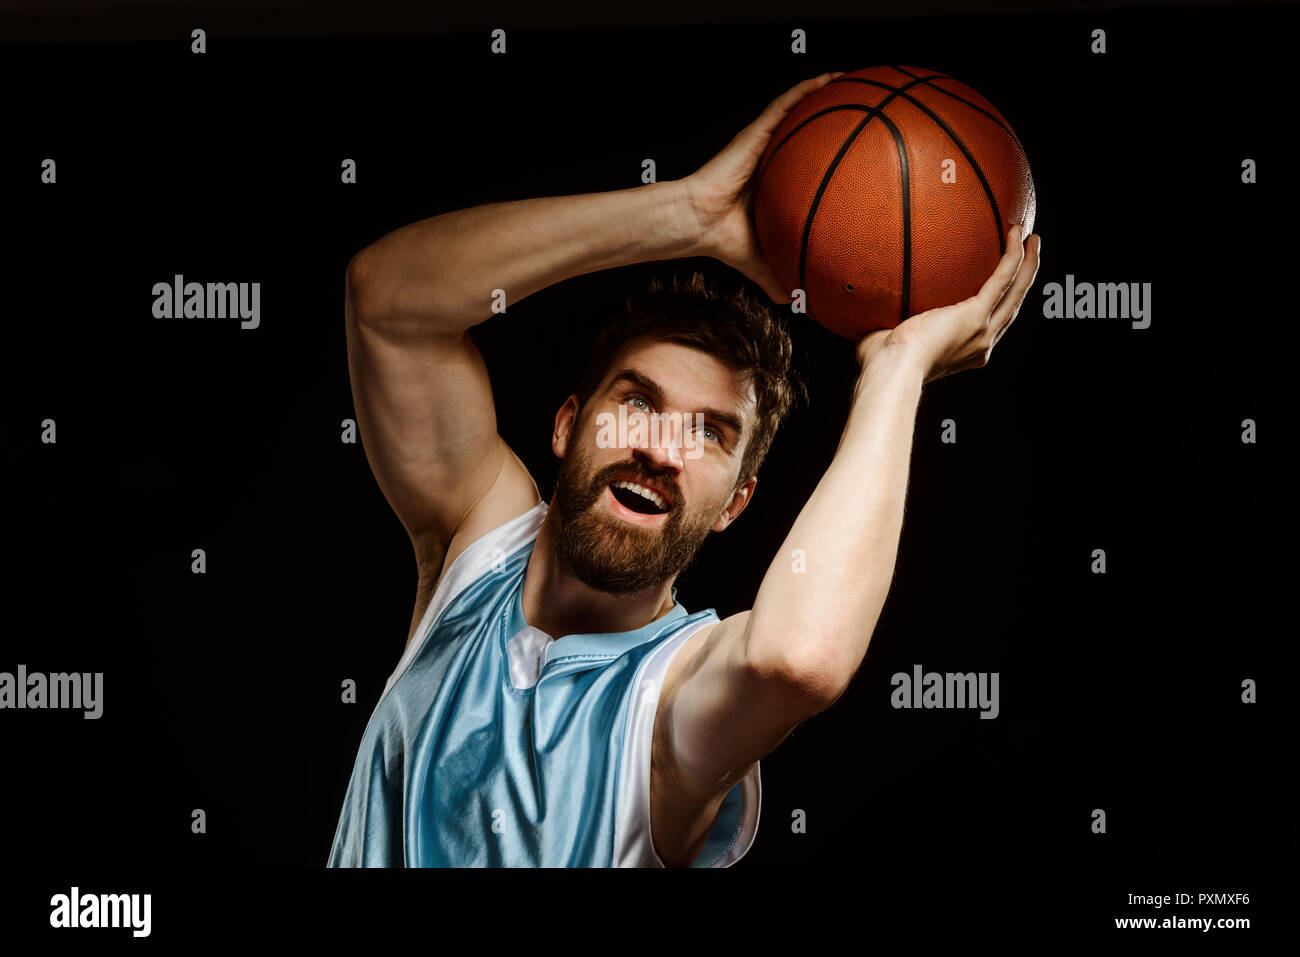 Player makes an overhead pass Stock Photo